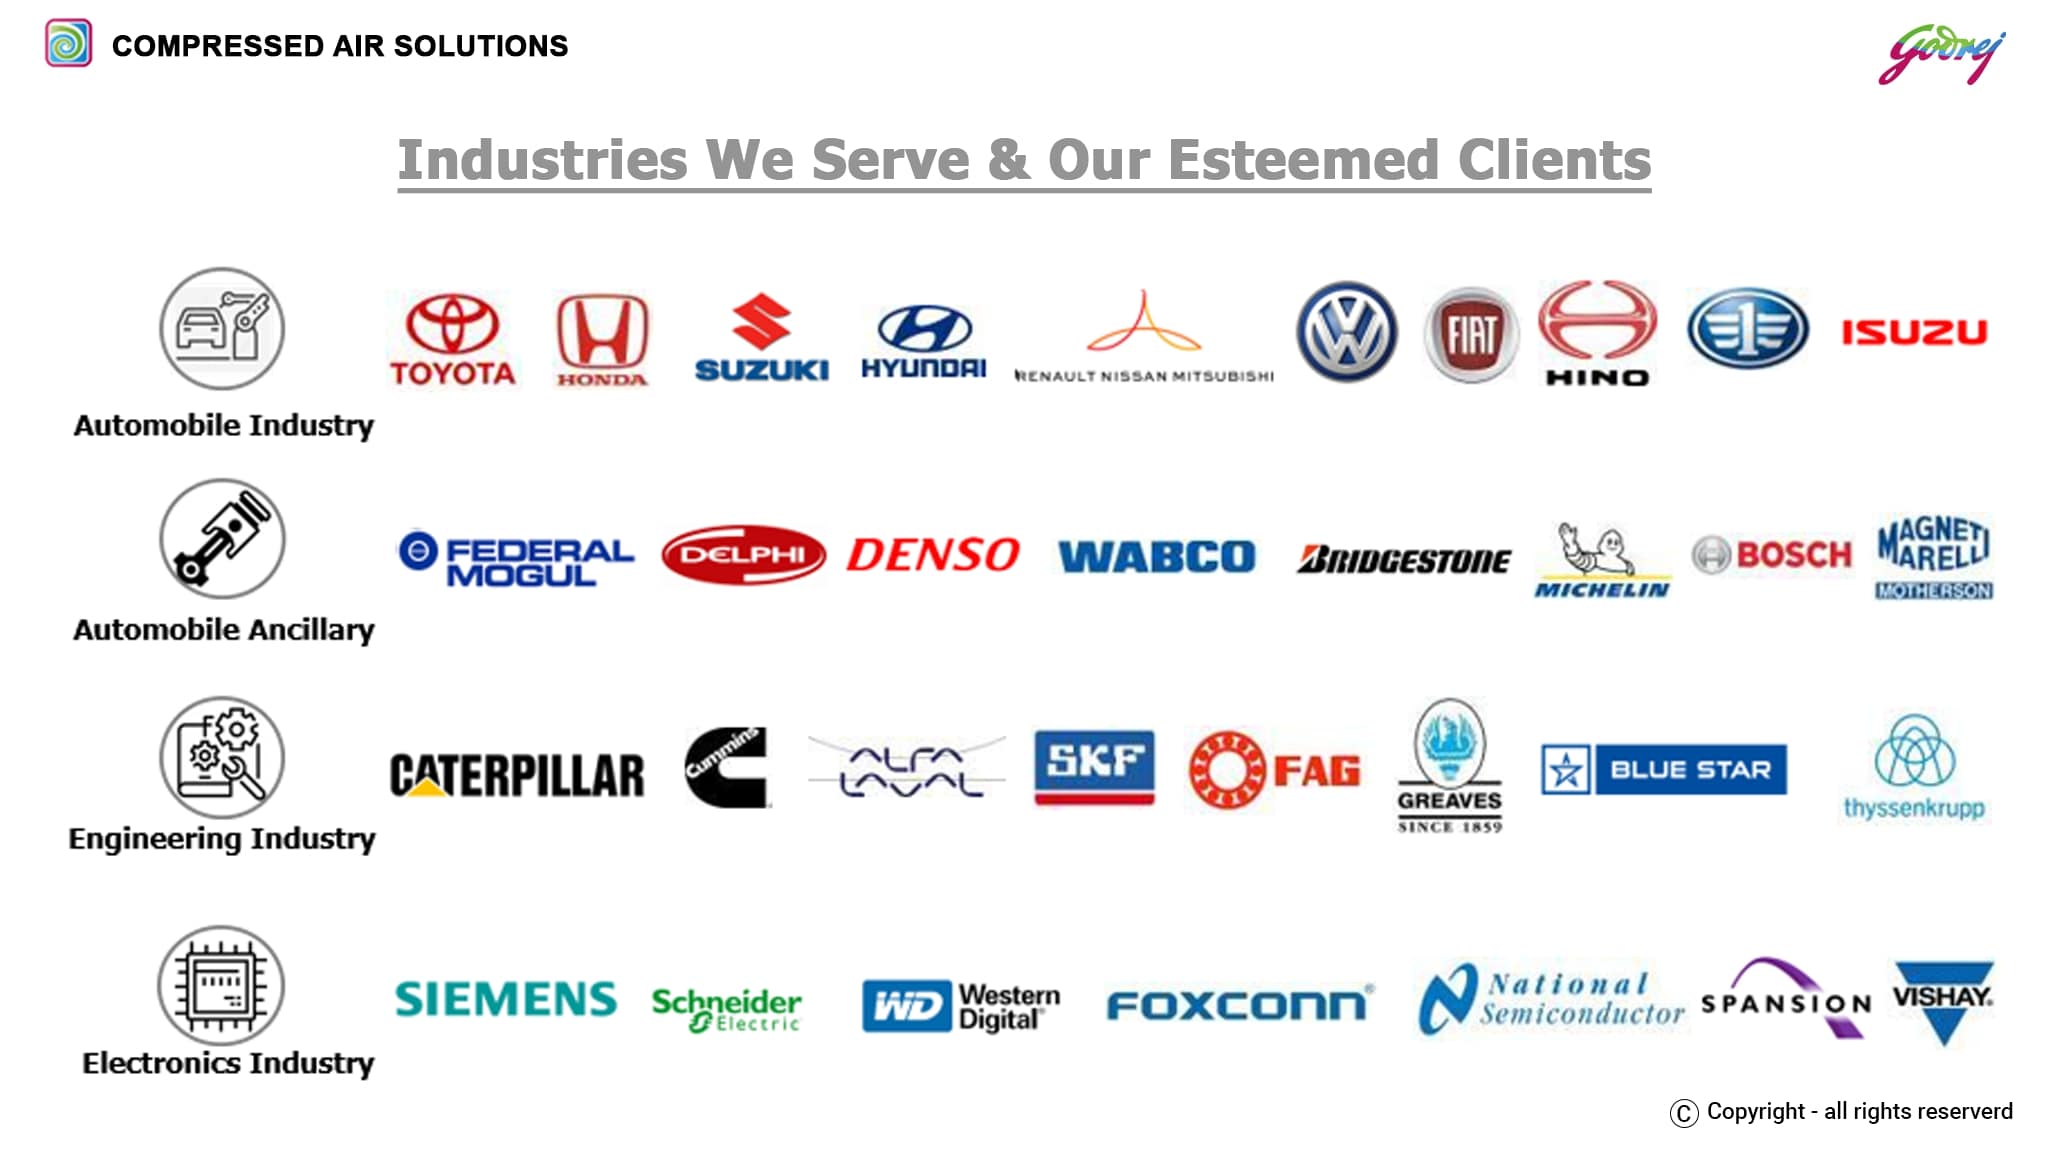 Industries We Serve & Our Esteemed Clients-ENERGY SAVING SOLUTIONS IN COMPRESSED AIR NETWORK (GODREJ)